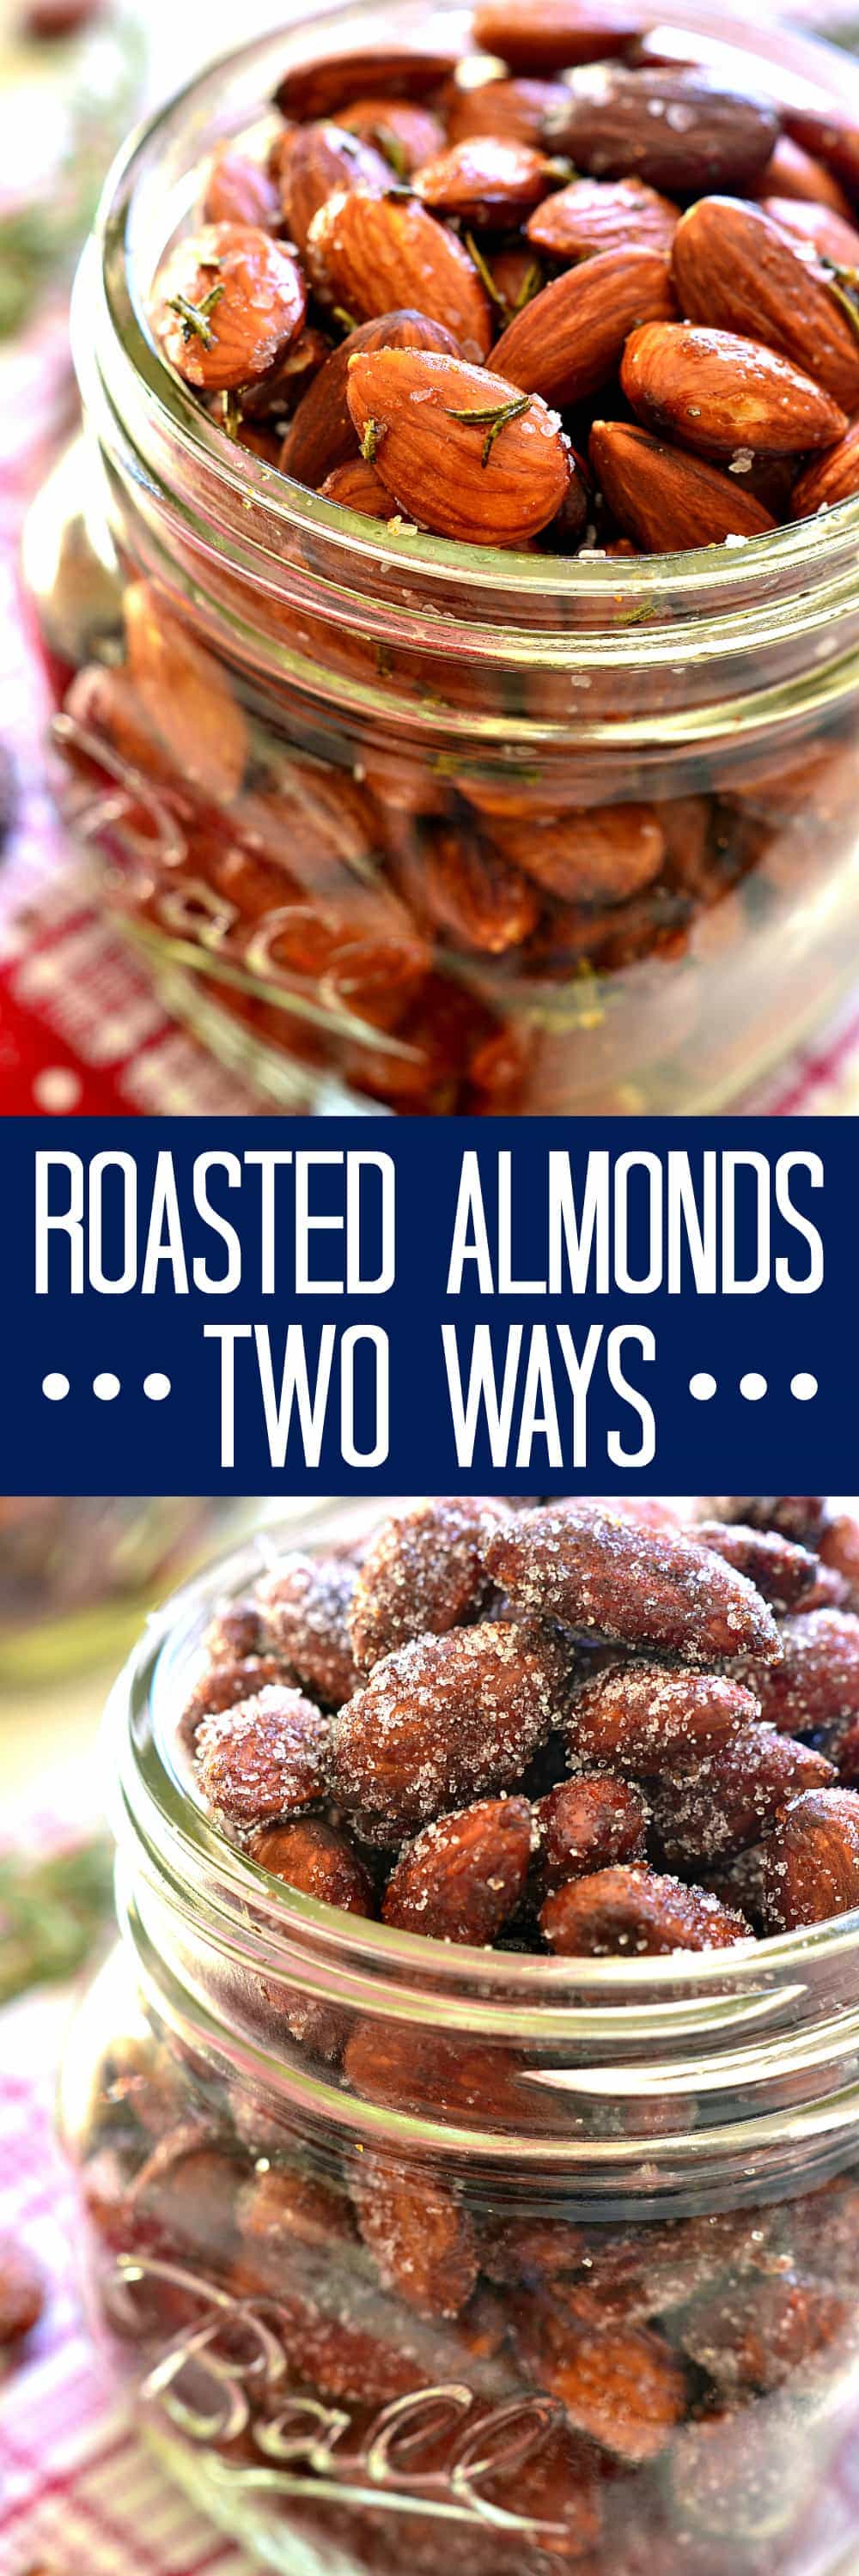 Cinnamon Honey Roasted Almonds & Rosemary Olive Oil Roasted Almonds - one savory, one sweet, both equally delicious and perfect for holiday gifting!